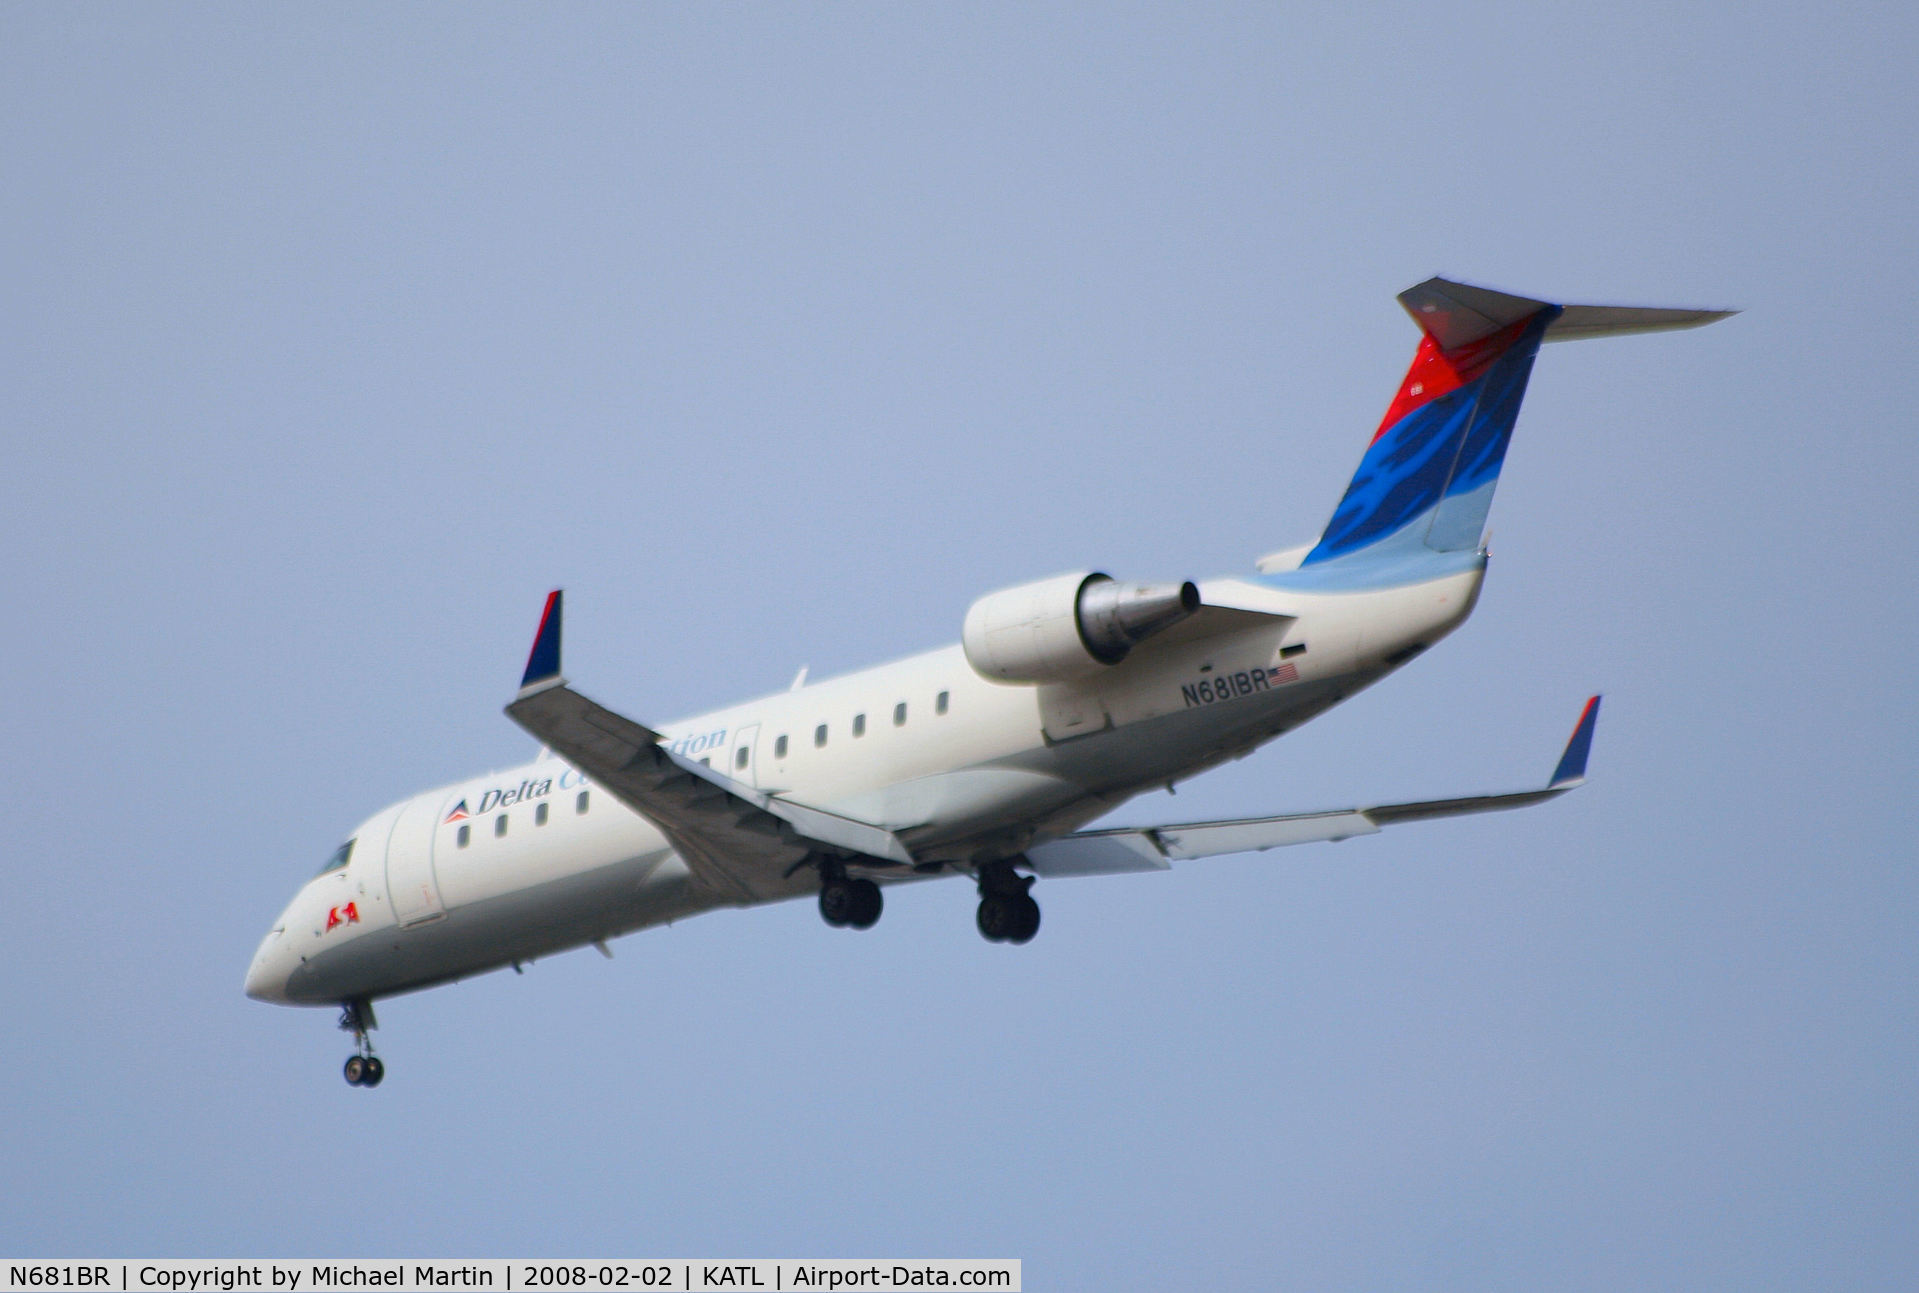 N681BR, 2002 Bombardier CRJ-200ER (CL-600-2B19) C/N 7680, Over the numbers of 26R